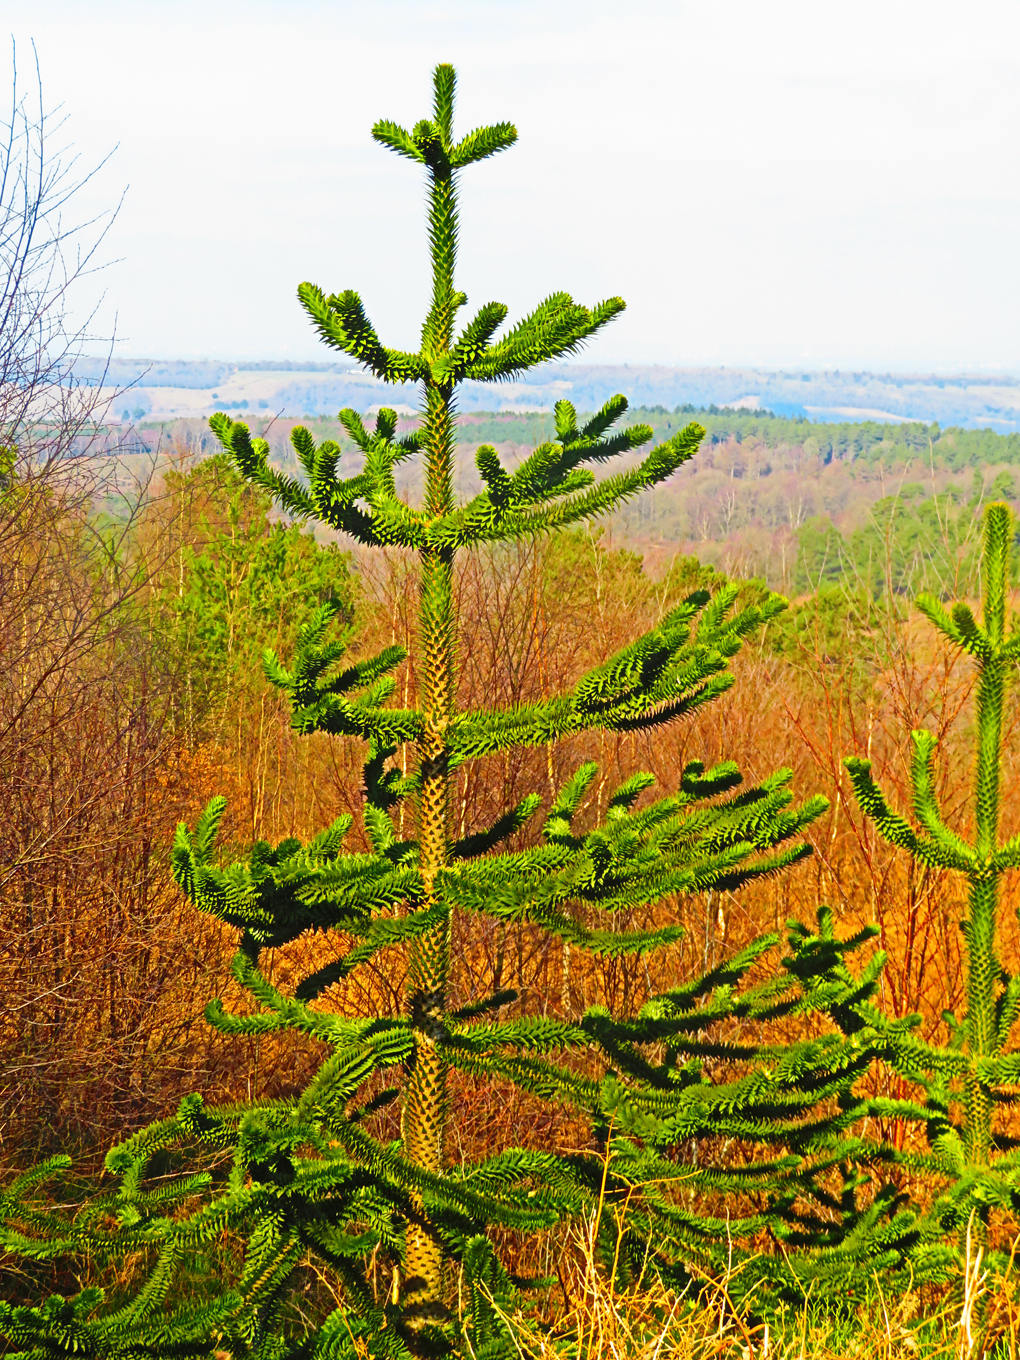 Monkey puzzle tree framed by the North Downs, picture taken from the rear of Leith Hill Tower